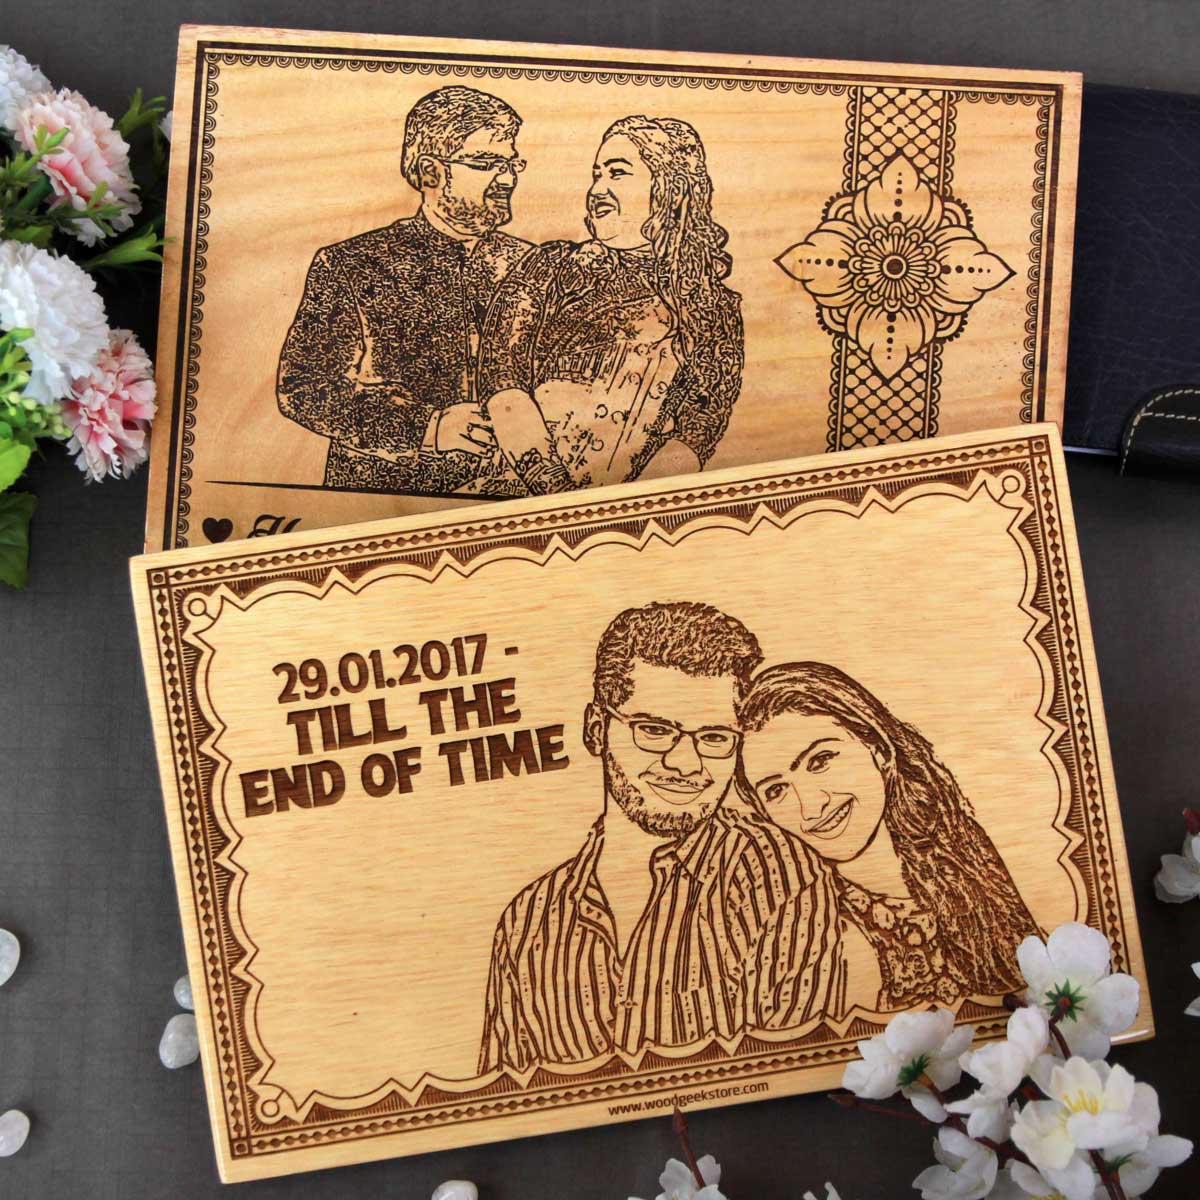 Personalized Heart Wooden Photo Frame for Anniversary Gift for Husband,  लकड़ी के आर्टिकल्स, वुडन आर्टिकल्स - Zest Pics, Hyderabad | ID:  2851534271673